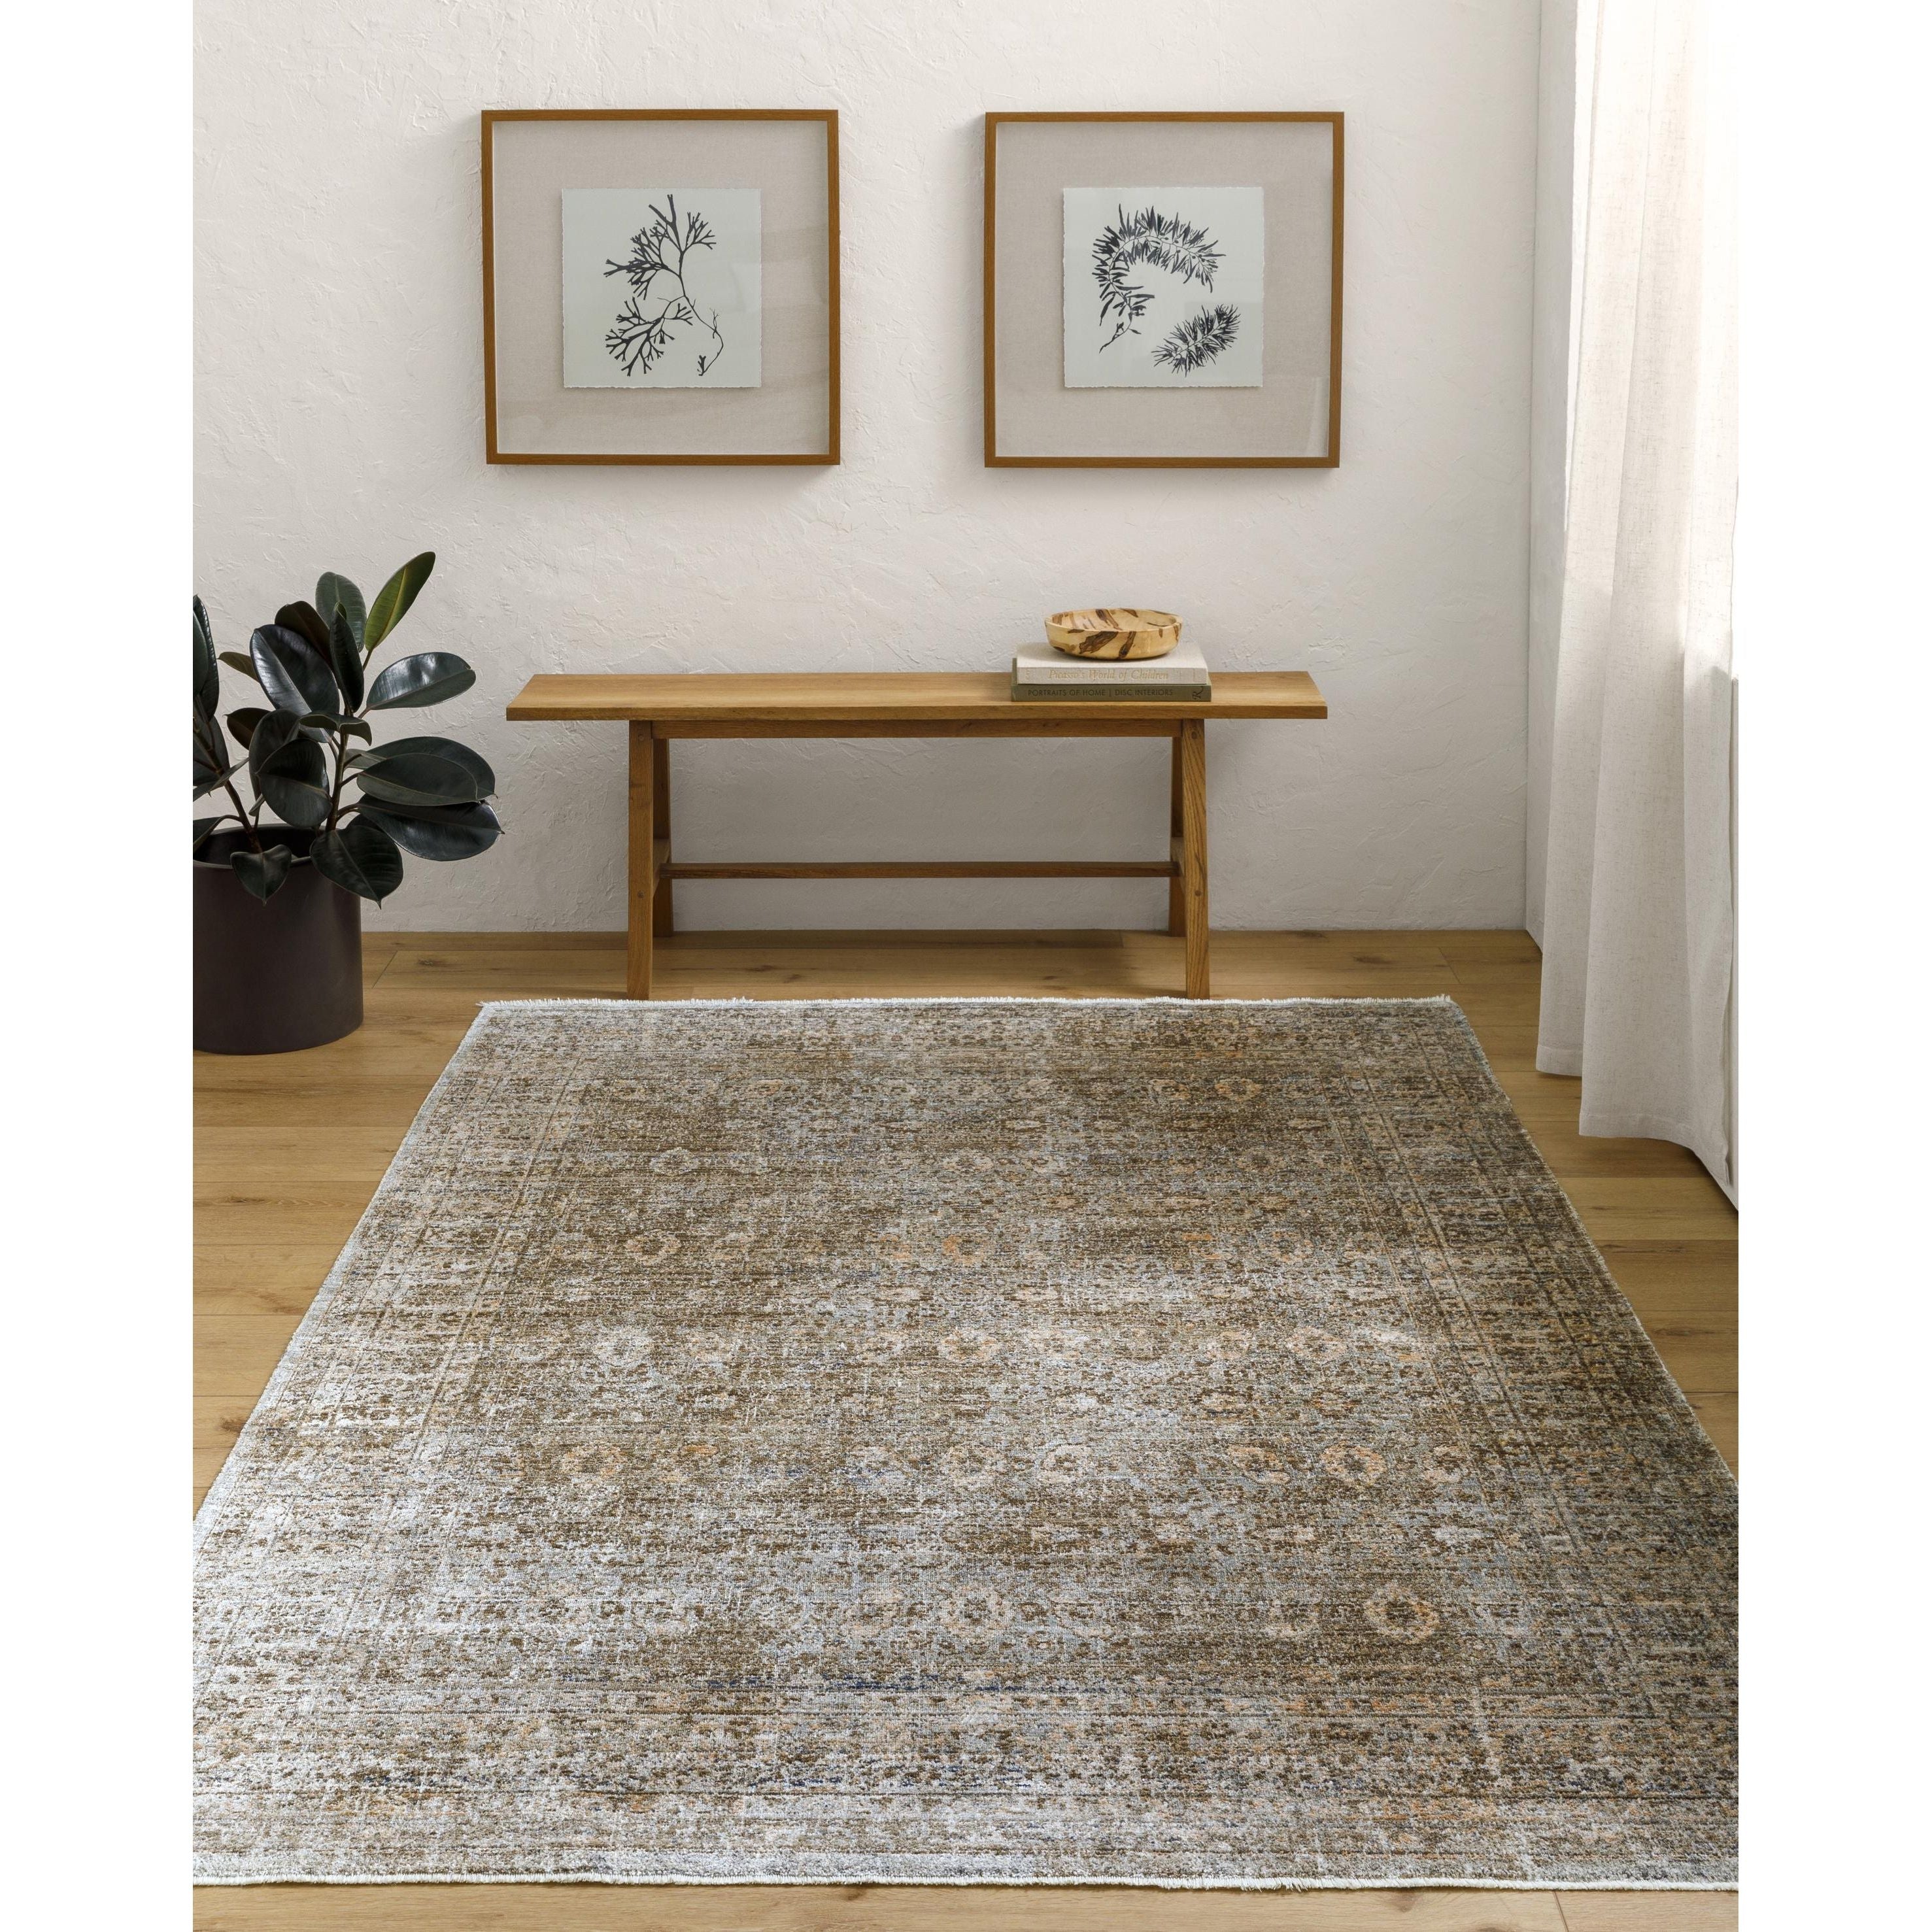 Introducing the Margaret area rug, a stunning collaboration between Surya and Becki Owens! This unique piece is sure to bring a touch of elegance to any room. Amethyst Home provides interior design, new home construction design consulting, vintage area rugs, and lighting in the Omaha metro area.